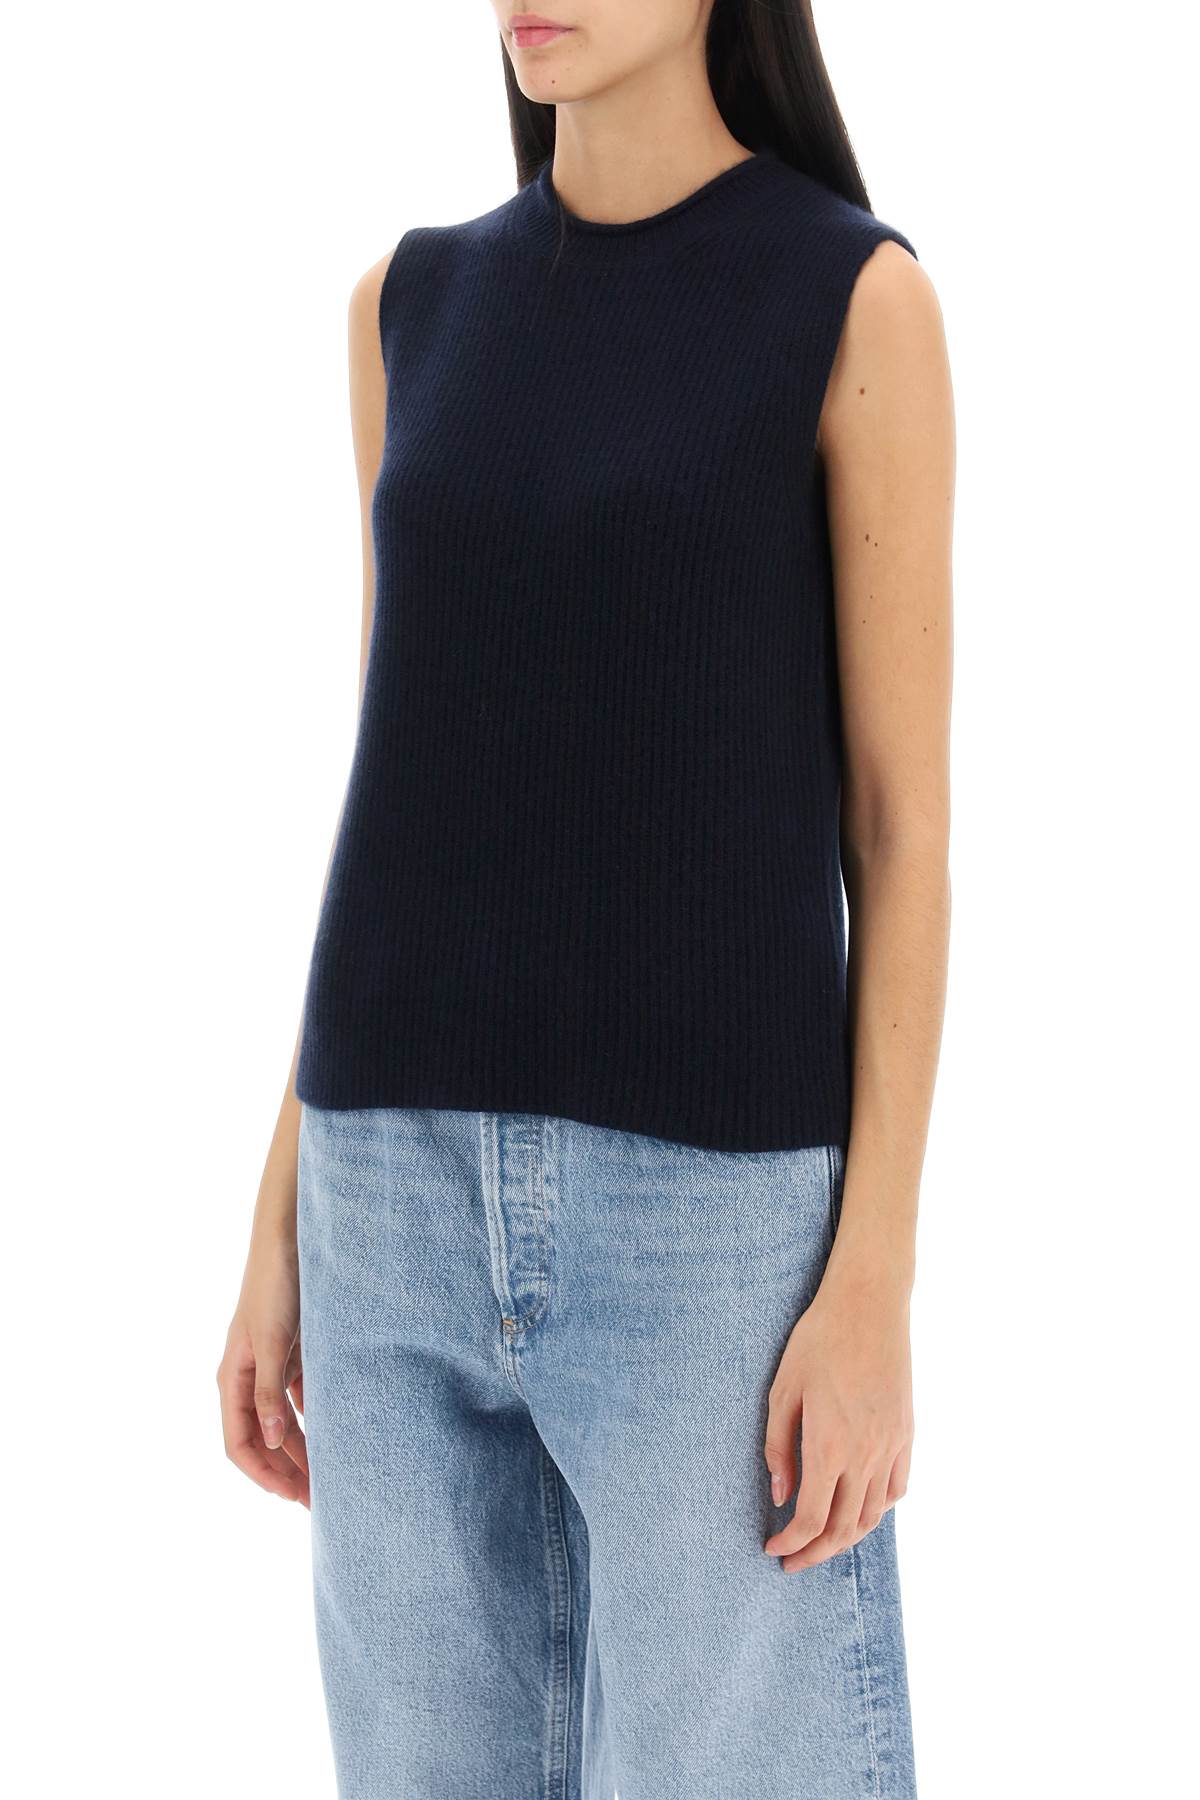 Guest in residence layer up cashmere vest-3